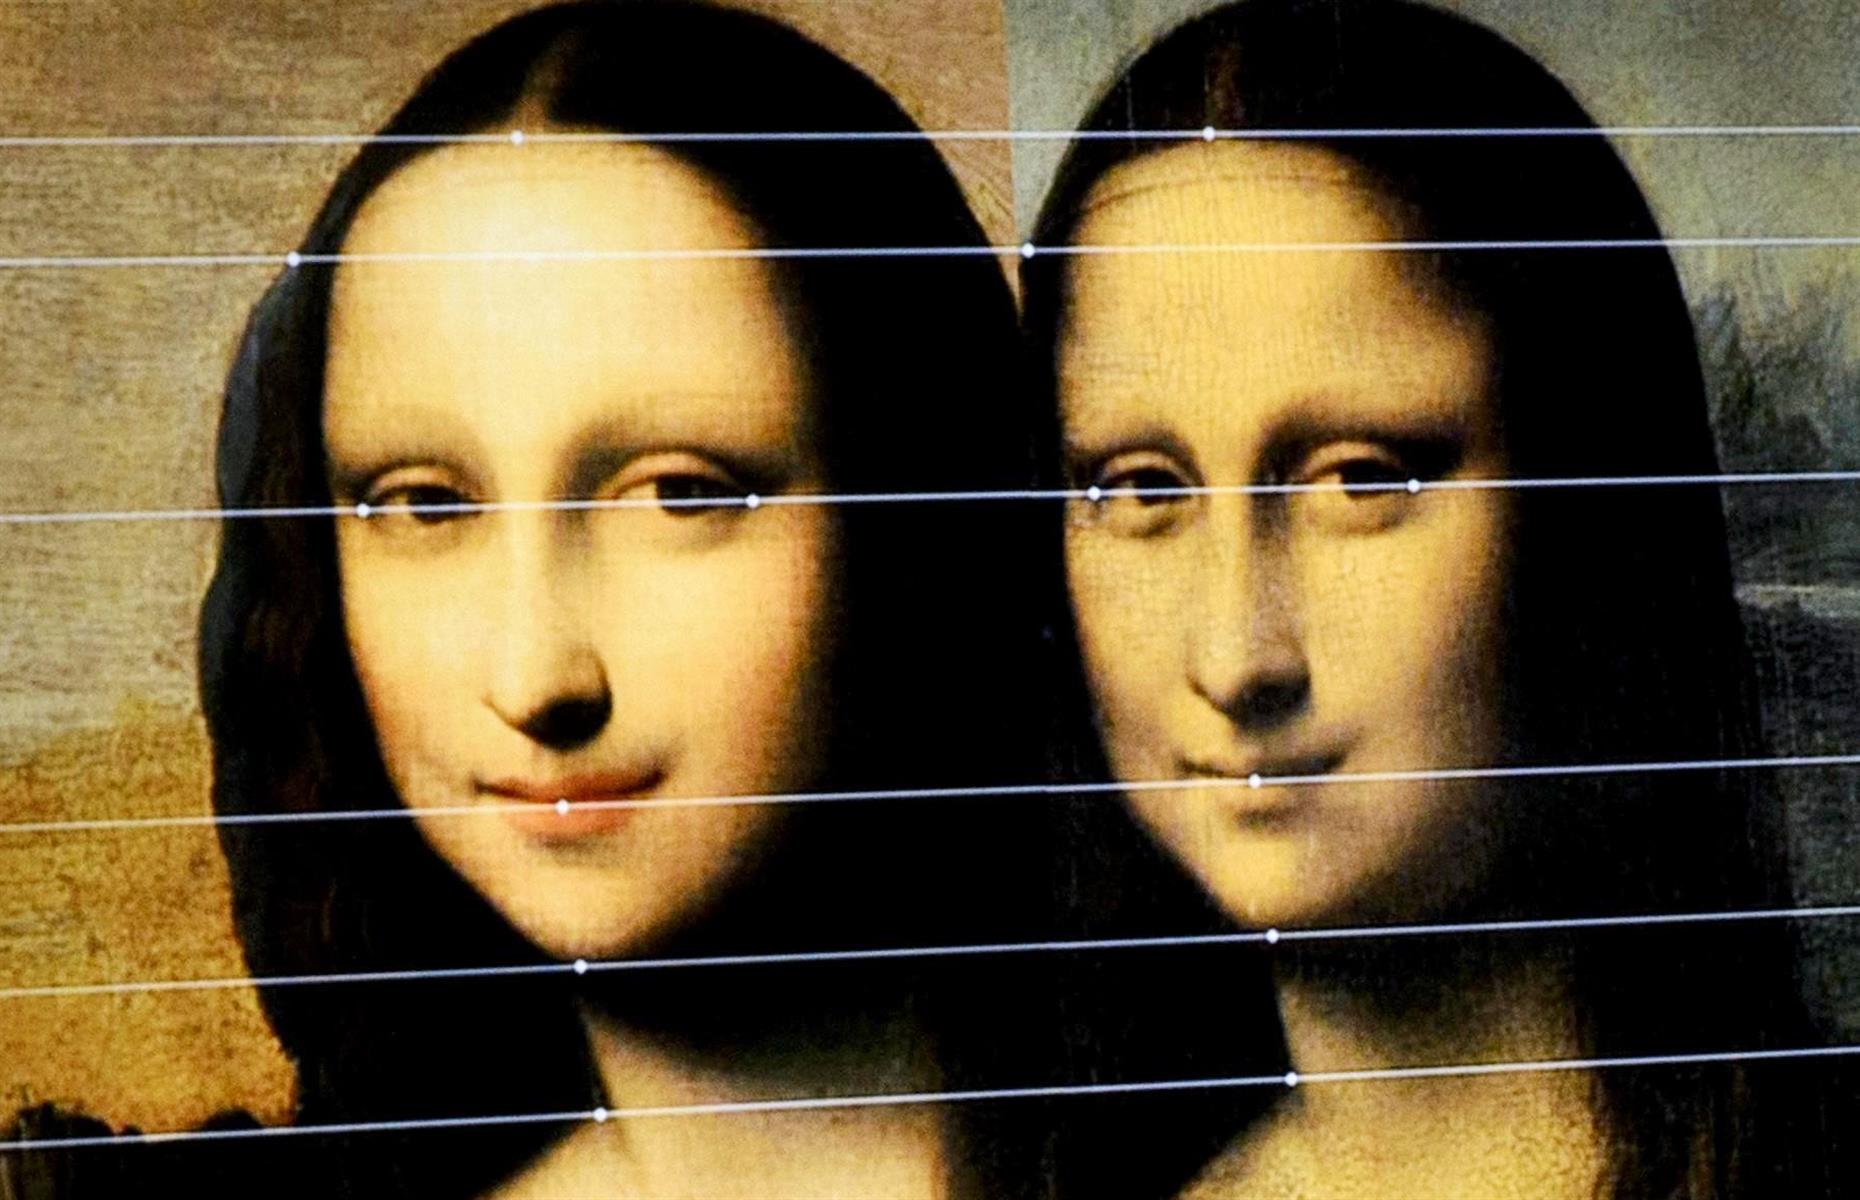 <p>Described as "the best known, the most visited, the most written about, the most sung about, the most parodied work of art in the world," we are all familiar with the Mona Lisa. However, it's less well known that two more Mona Lisas have surfaced in recent years, and the people who own them claim they are authentic. Read on as we look at the tangled story behind three versions of the world's most famous painting.</p>